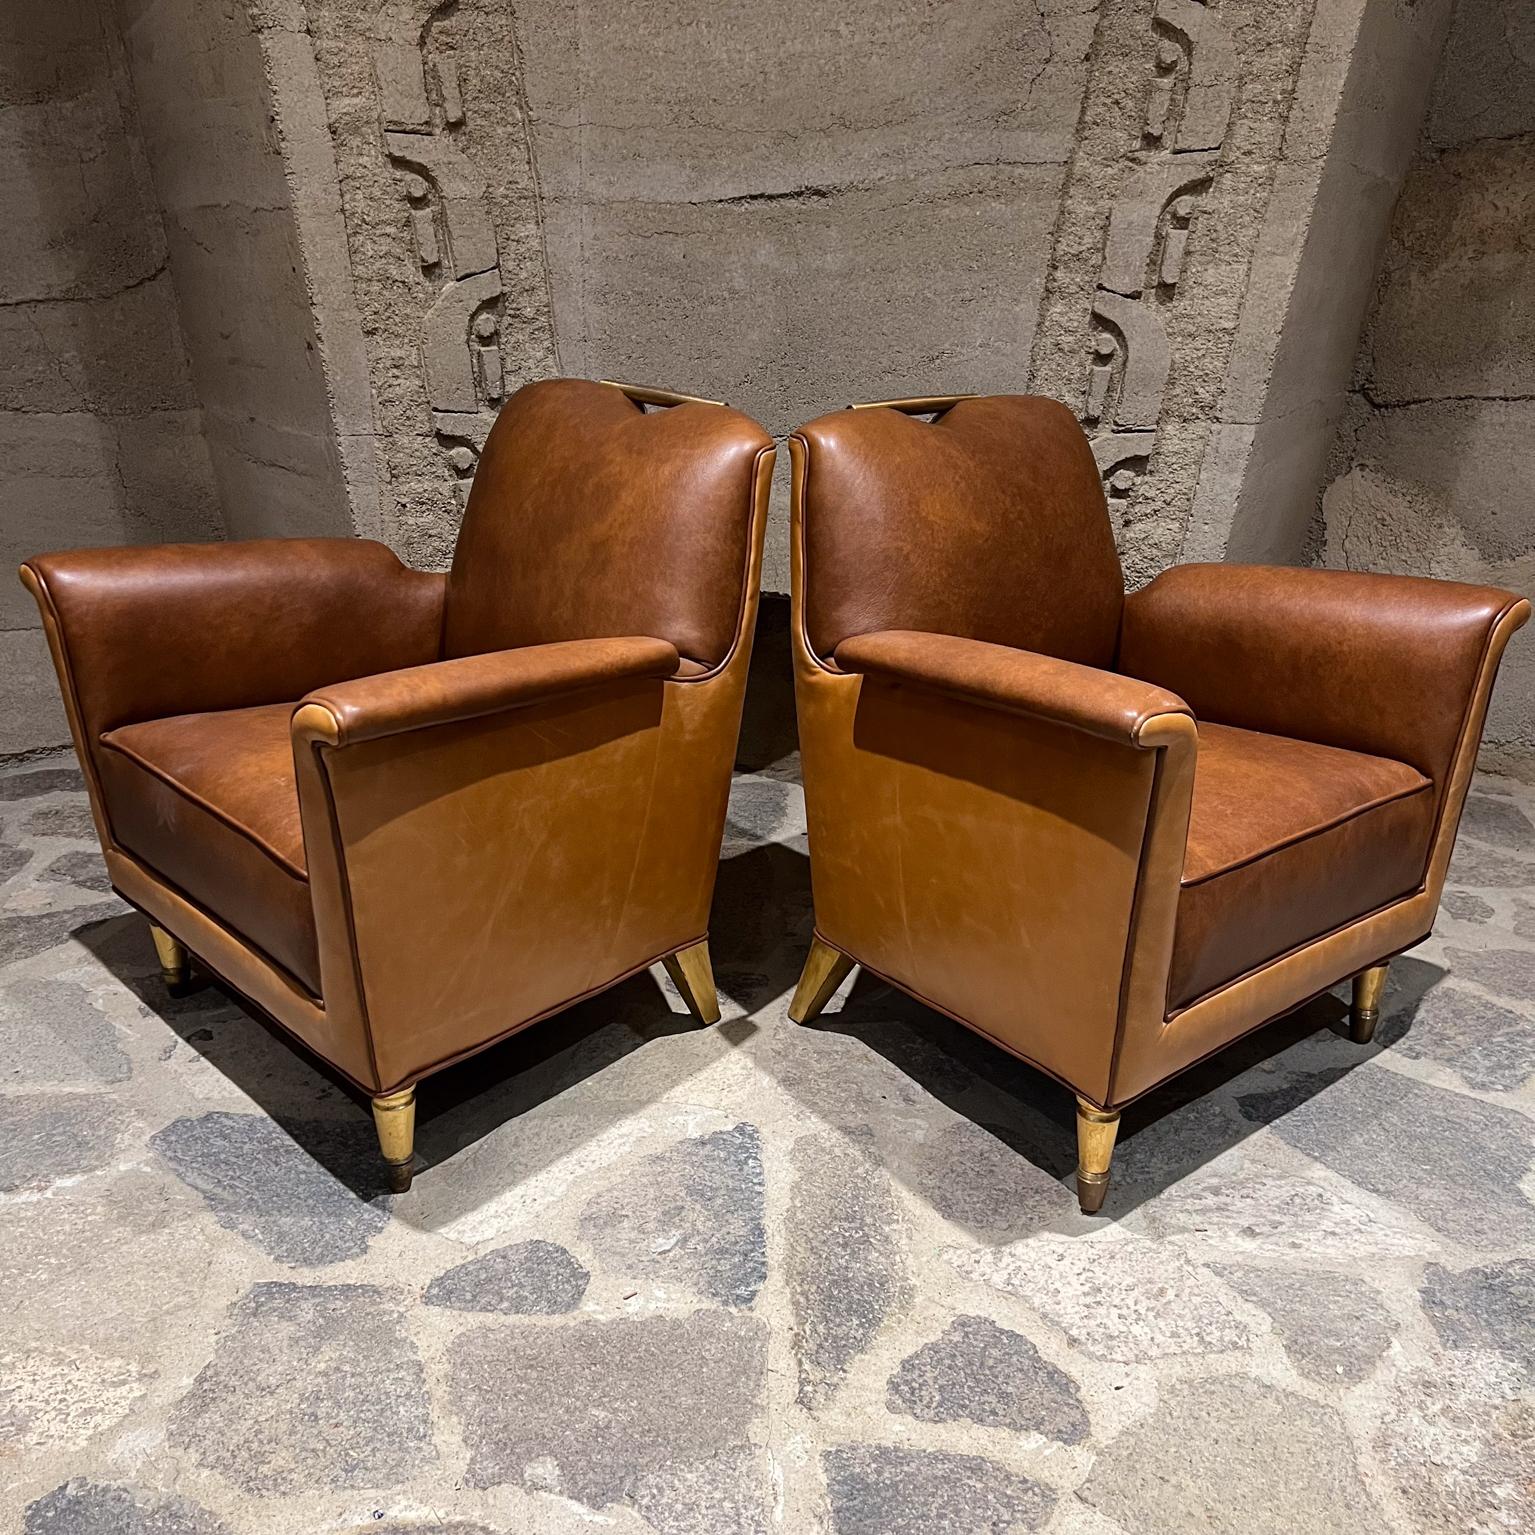 1950s Octavio Vidales Chairs Leather and Mahogany Mexico City For Sale 7